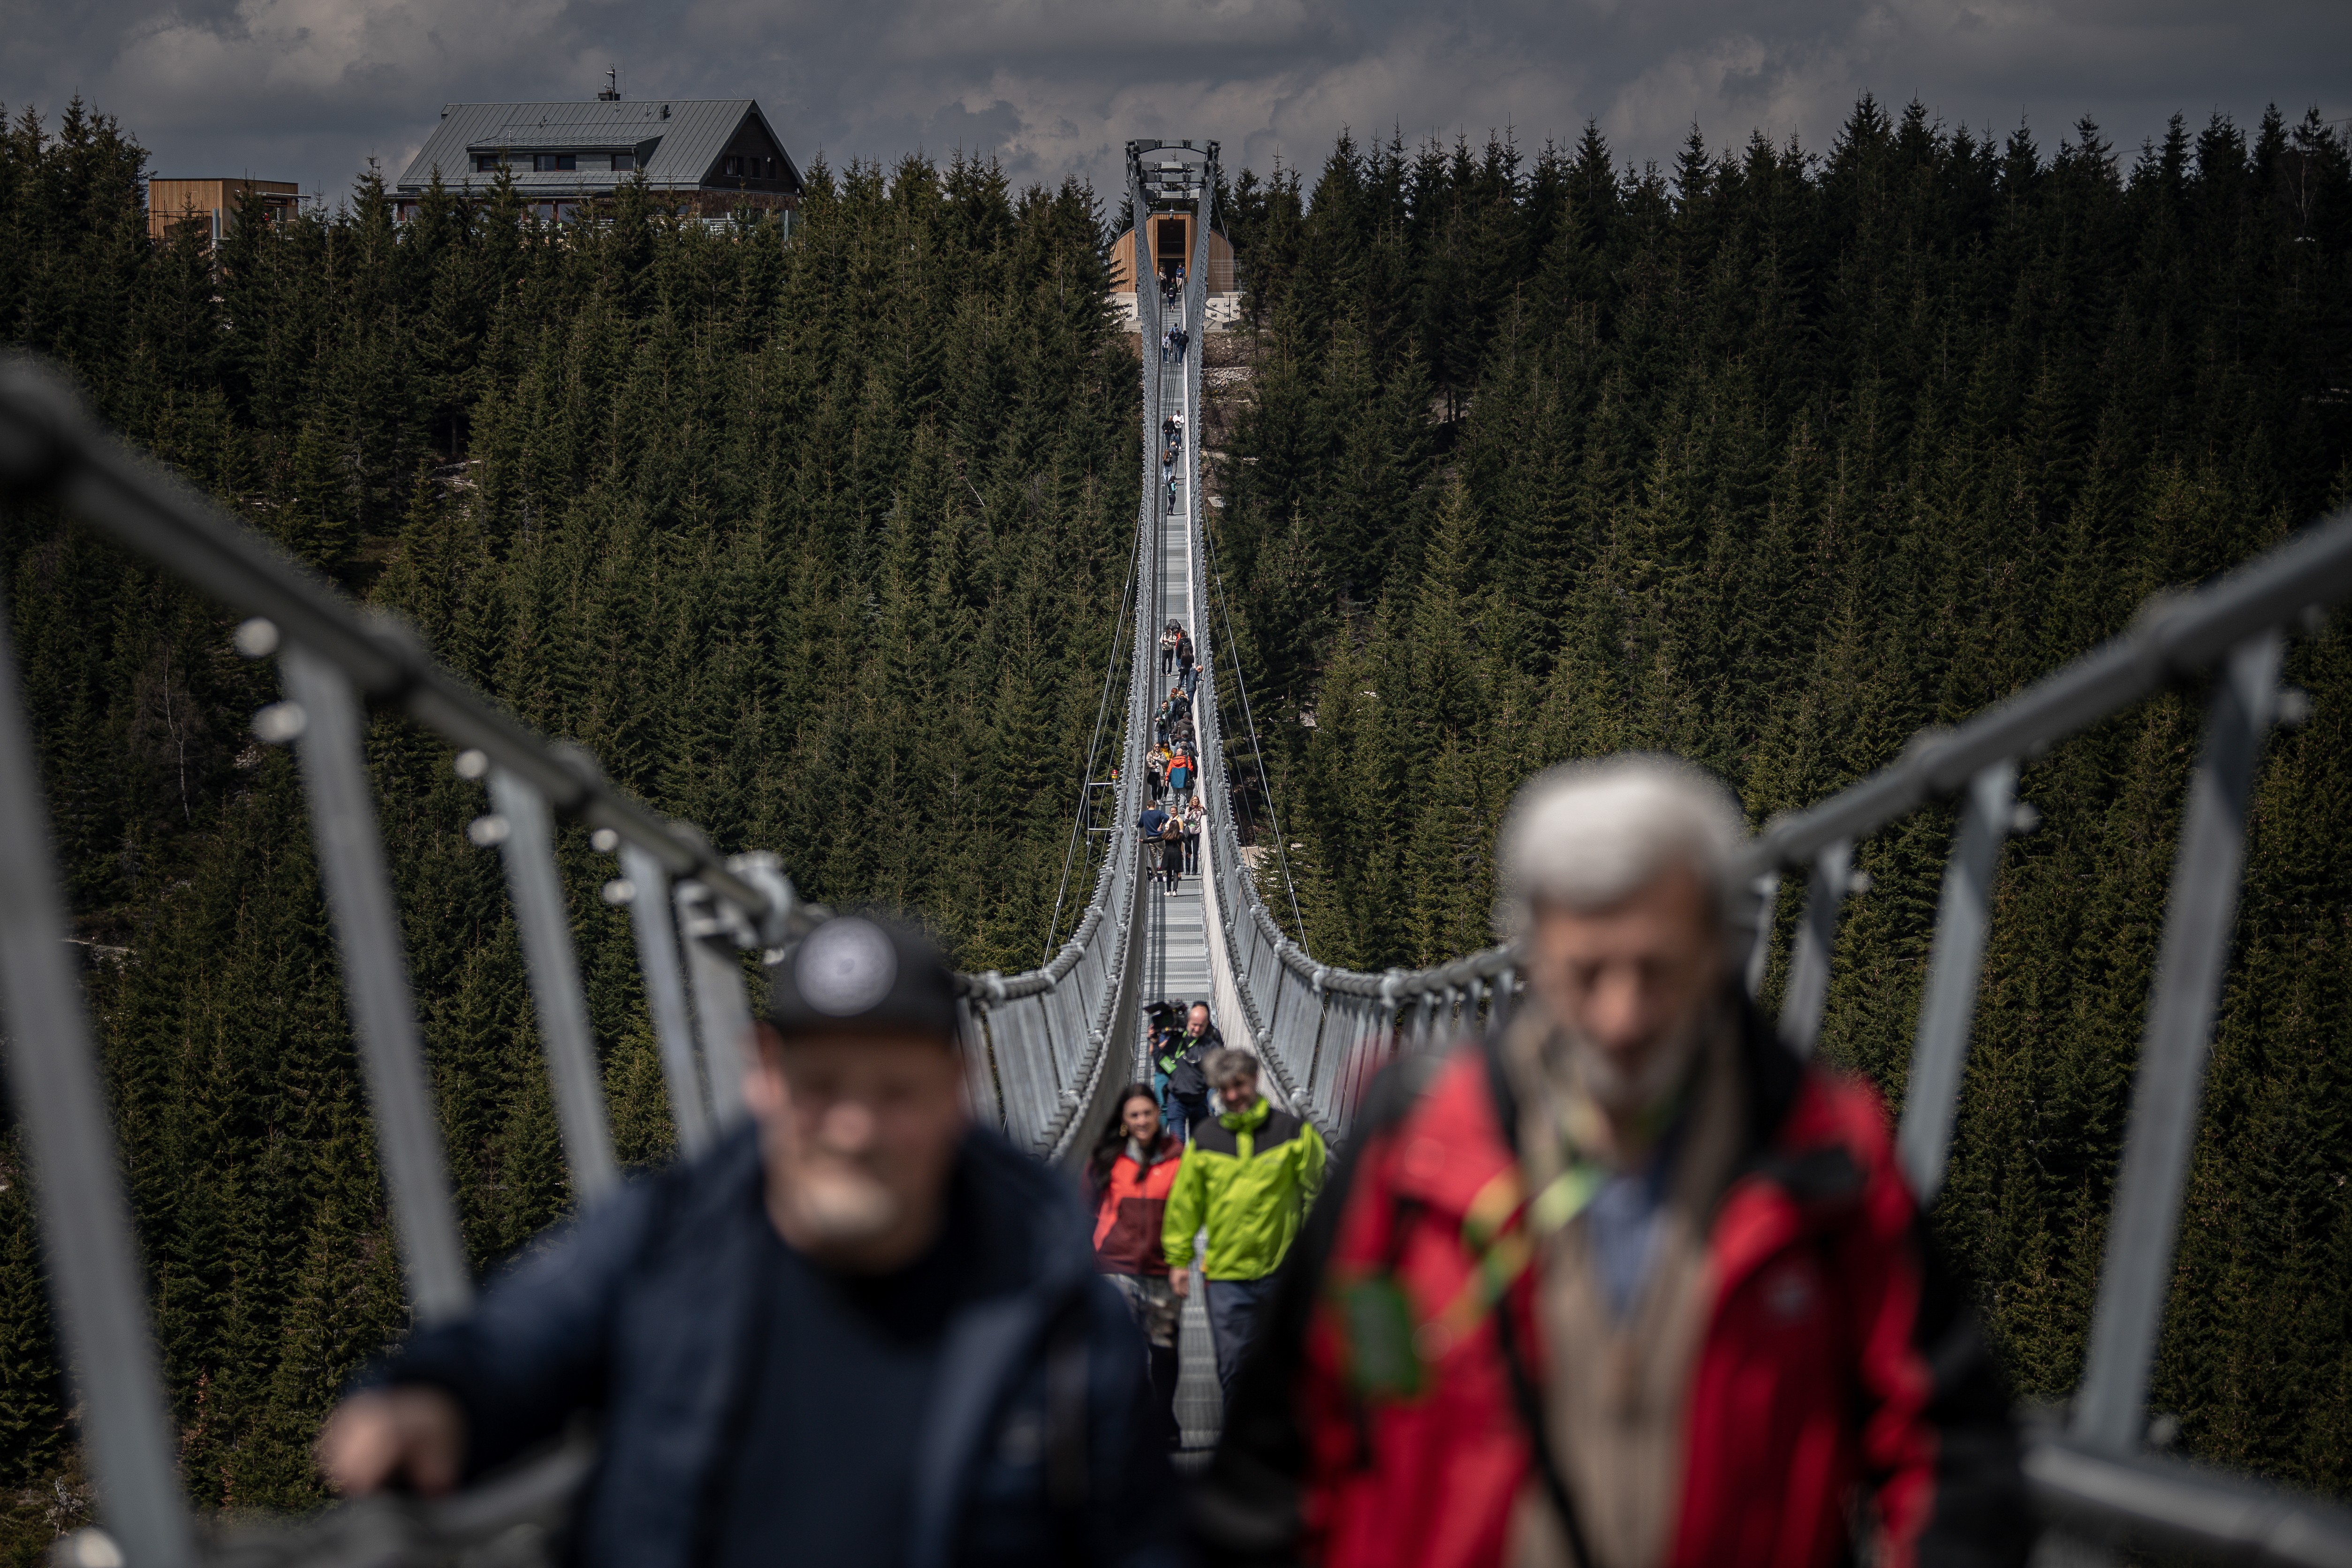 DOLNI MORAVA, CZECH REPUBLIC - MAY 9: Visitors walk on the Sky Bridge 721, the world's longest suspension pedestrian bridge in Dolni Morava, Czech Republic on May 9, 2022. Sky Bridge 721, the longest pedestrian bridge in the world with a length of 721 met (Foto: Anadolu Agency via Getty Images)